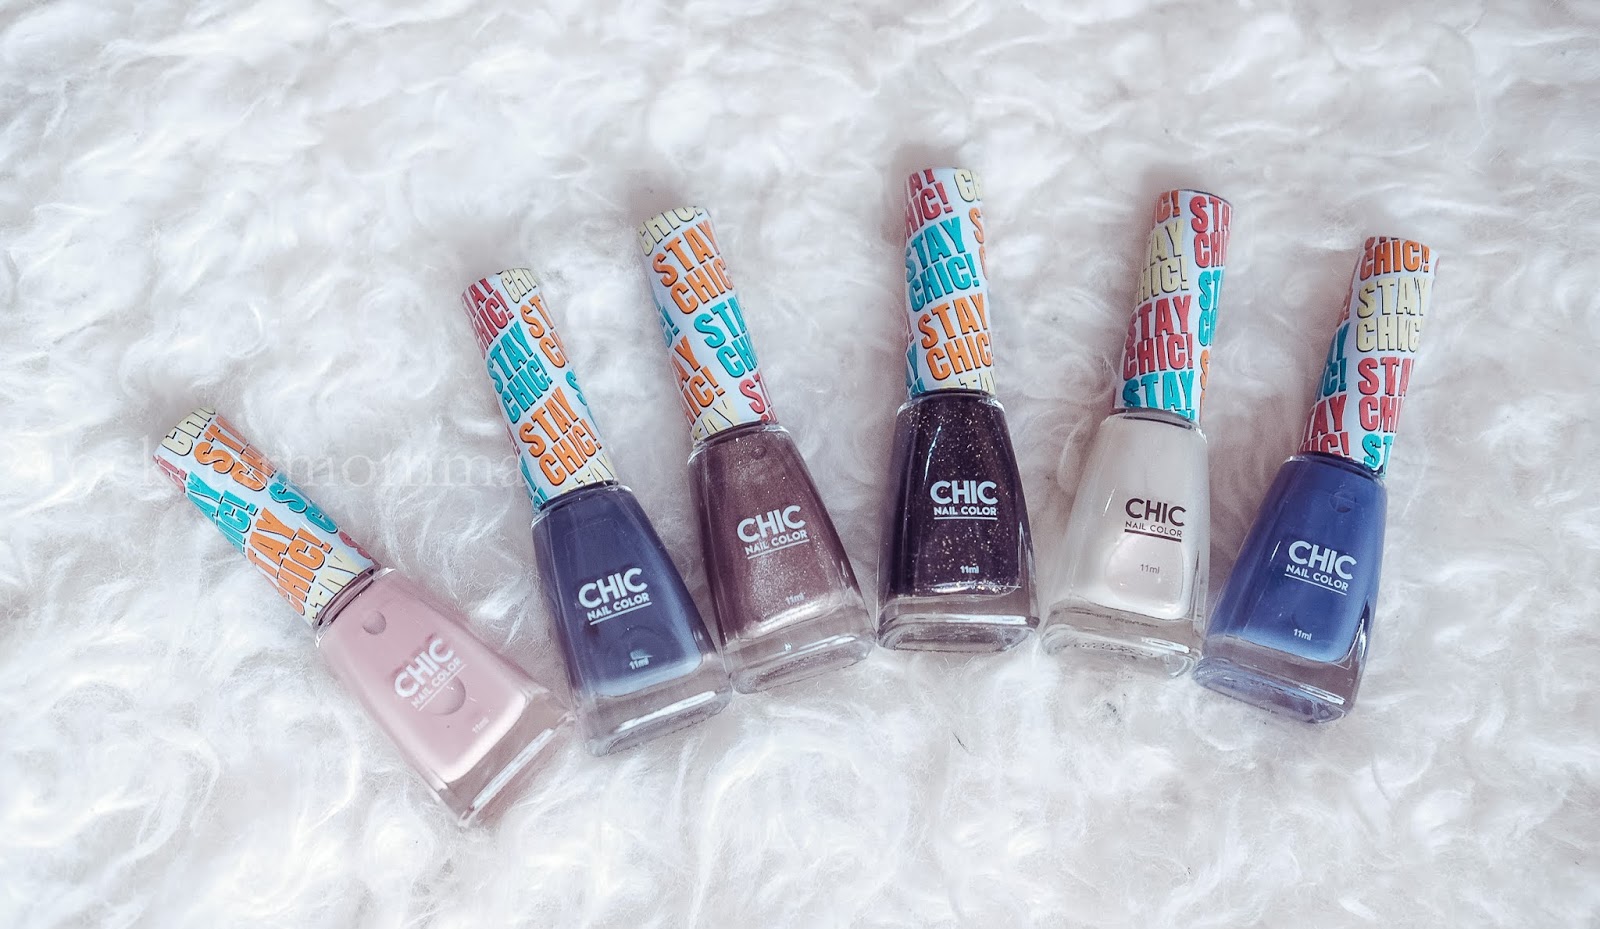 3. "Chic and Stylish Nail Polish Colors to Try Now" - wide 5